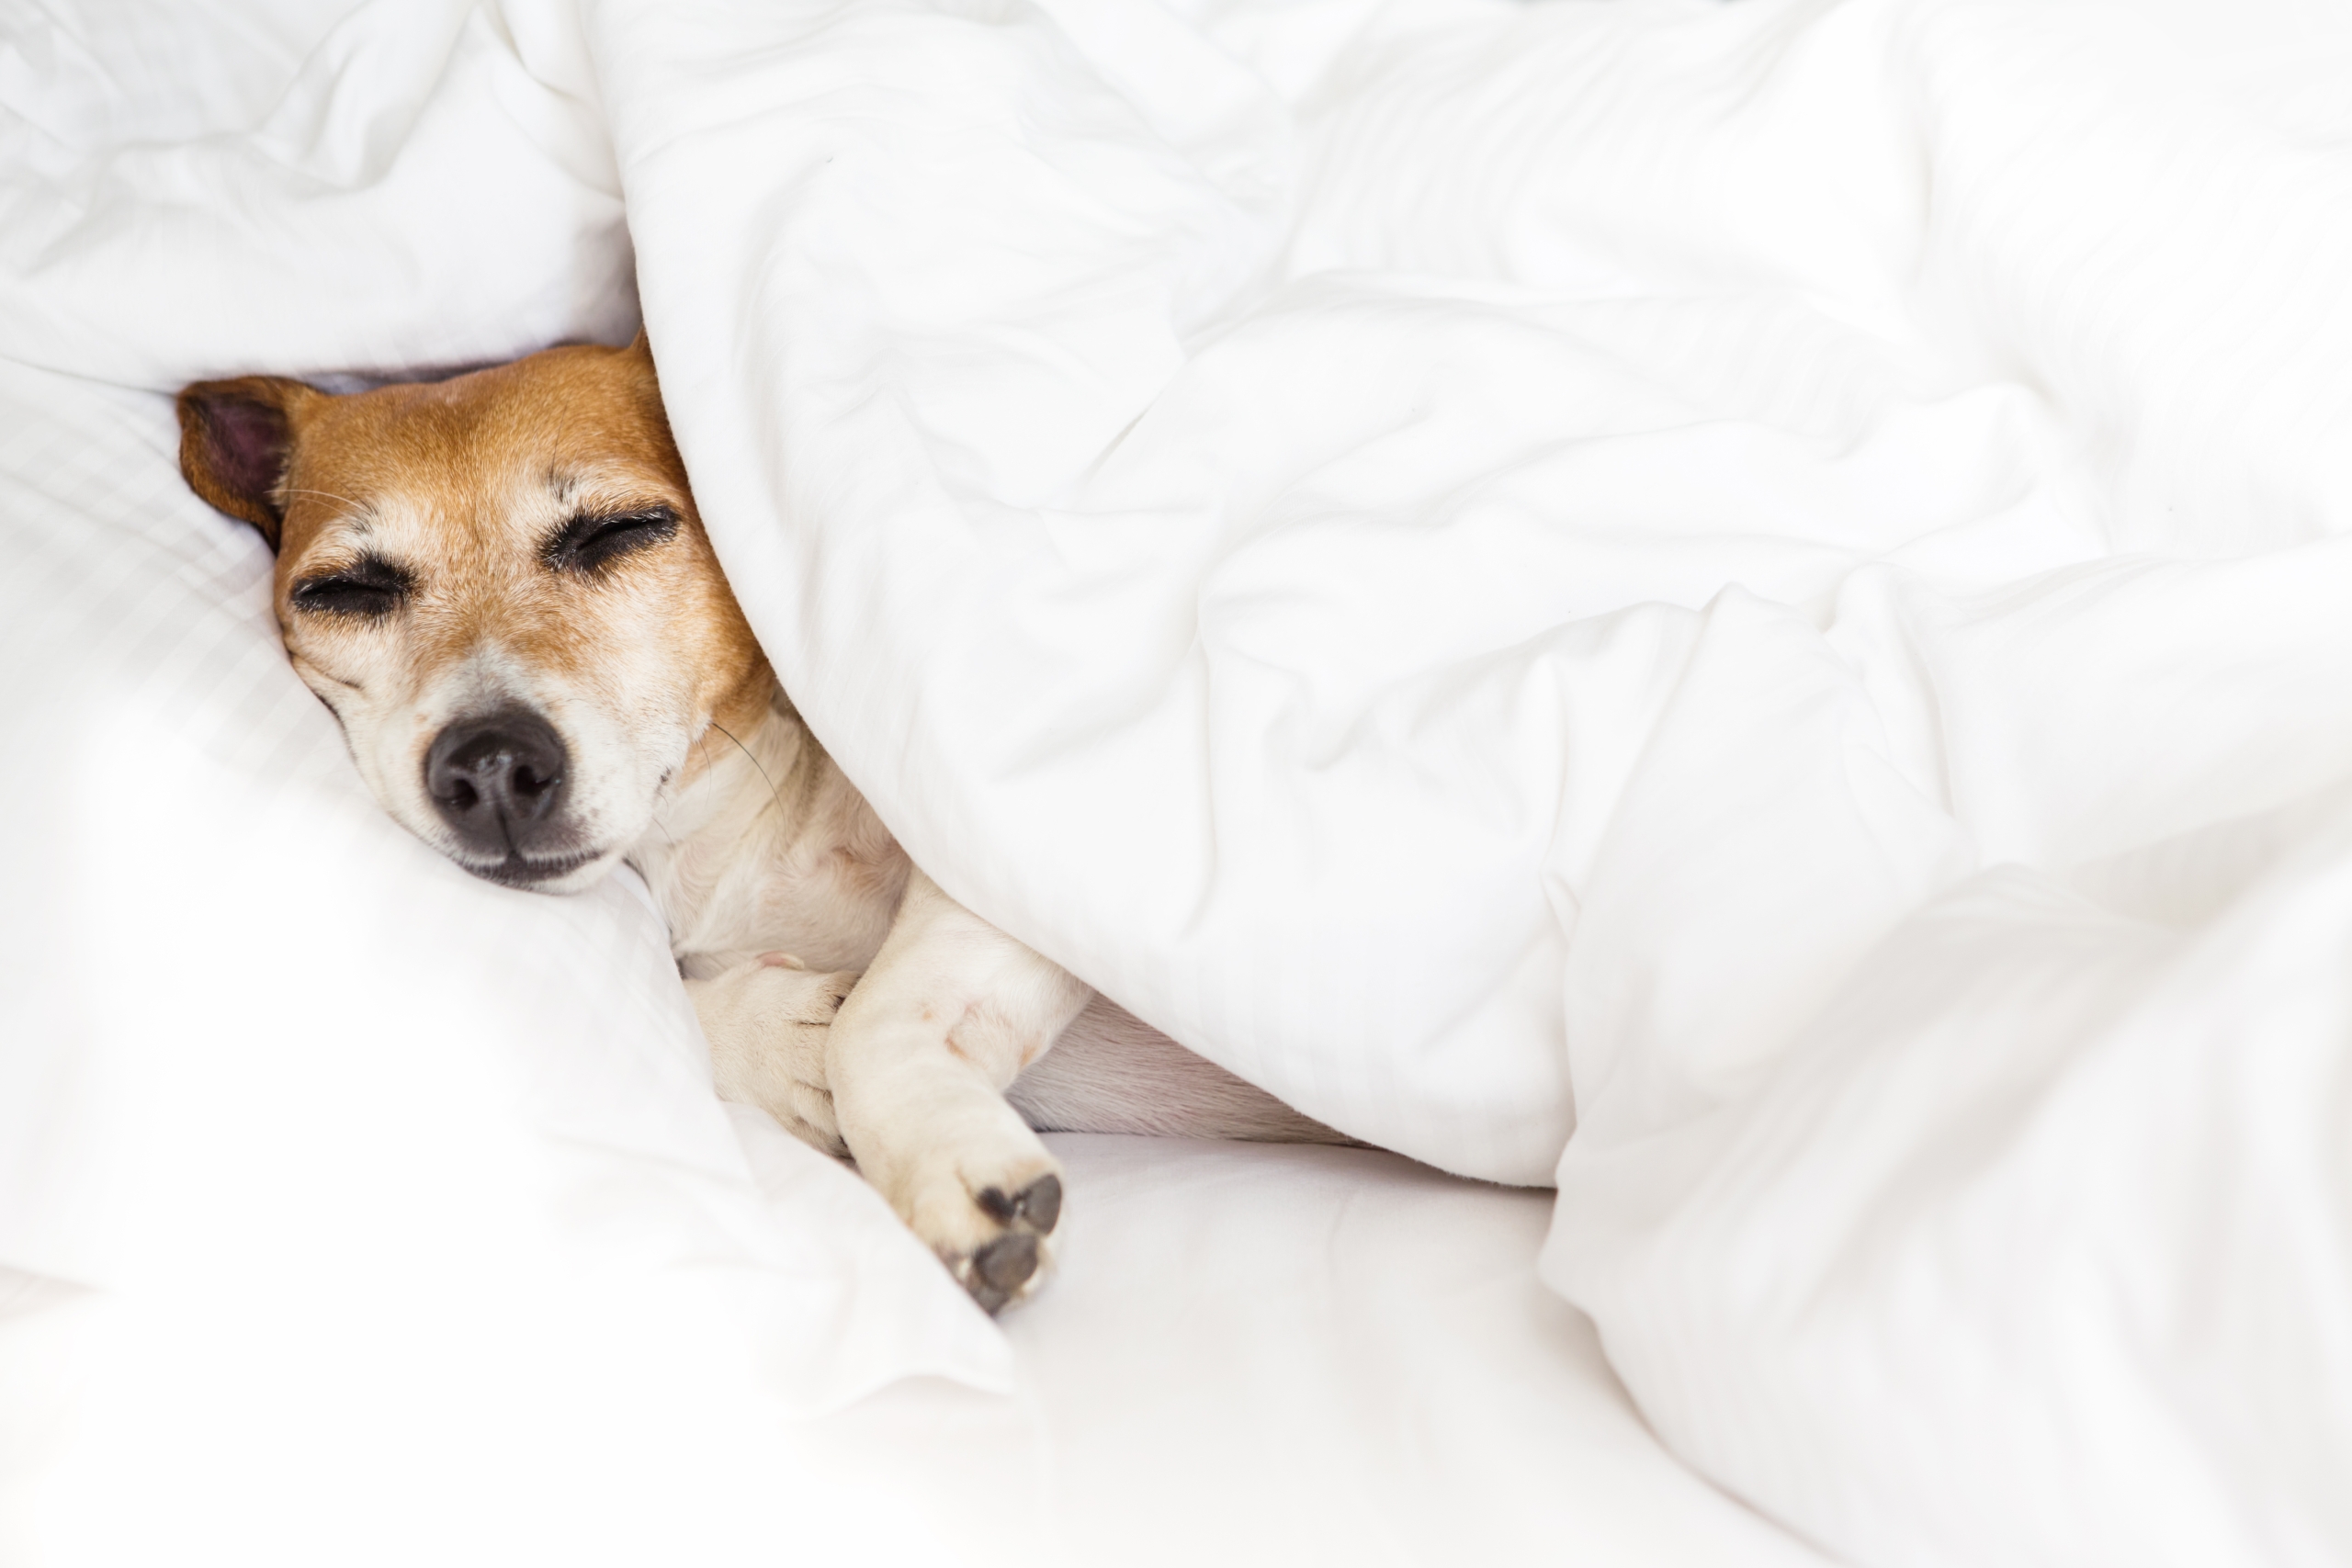 Dog asleep in hotel bed with white sheets and duvet cover